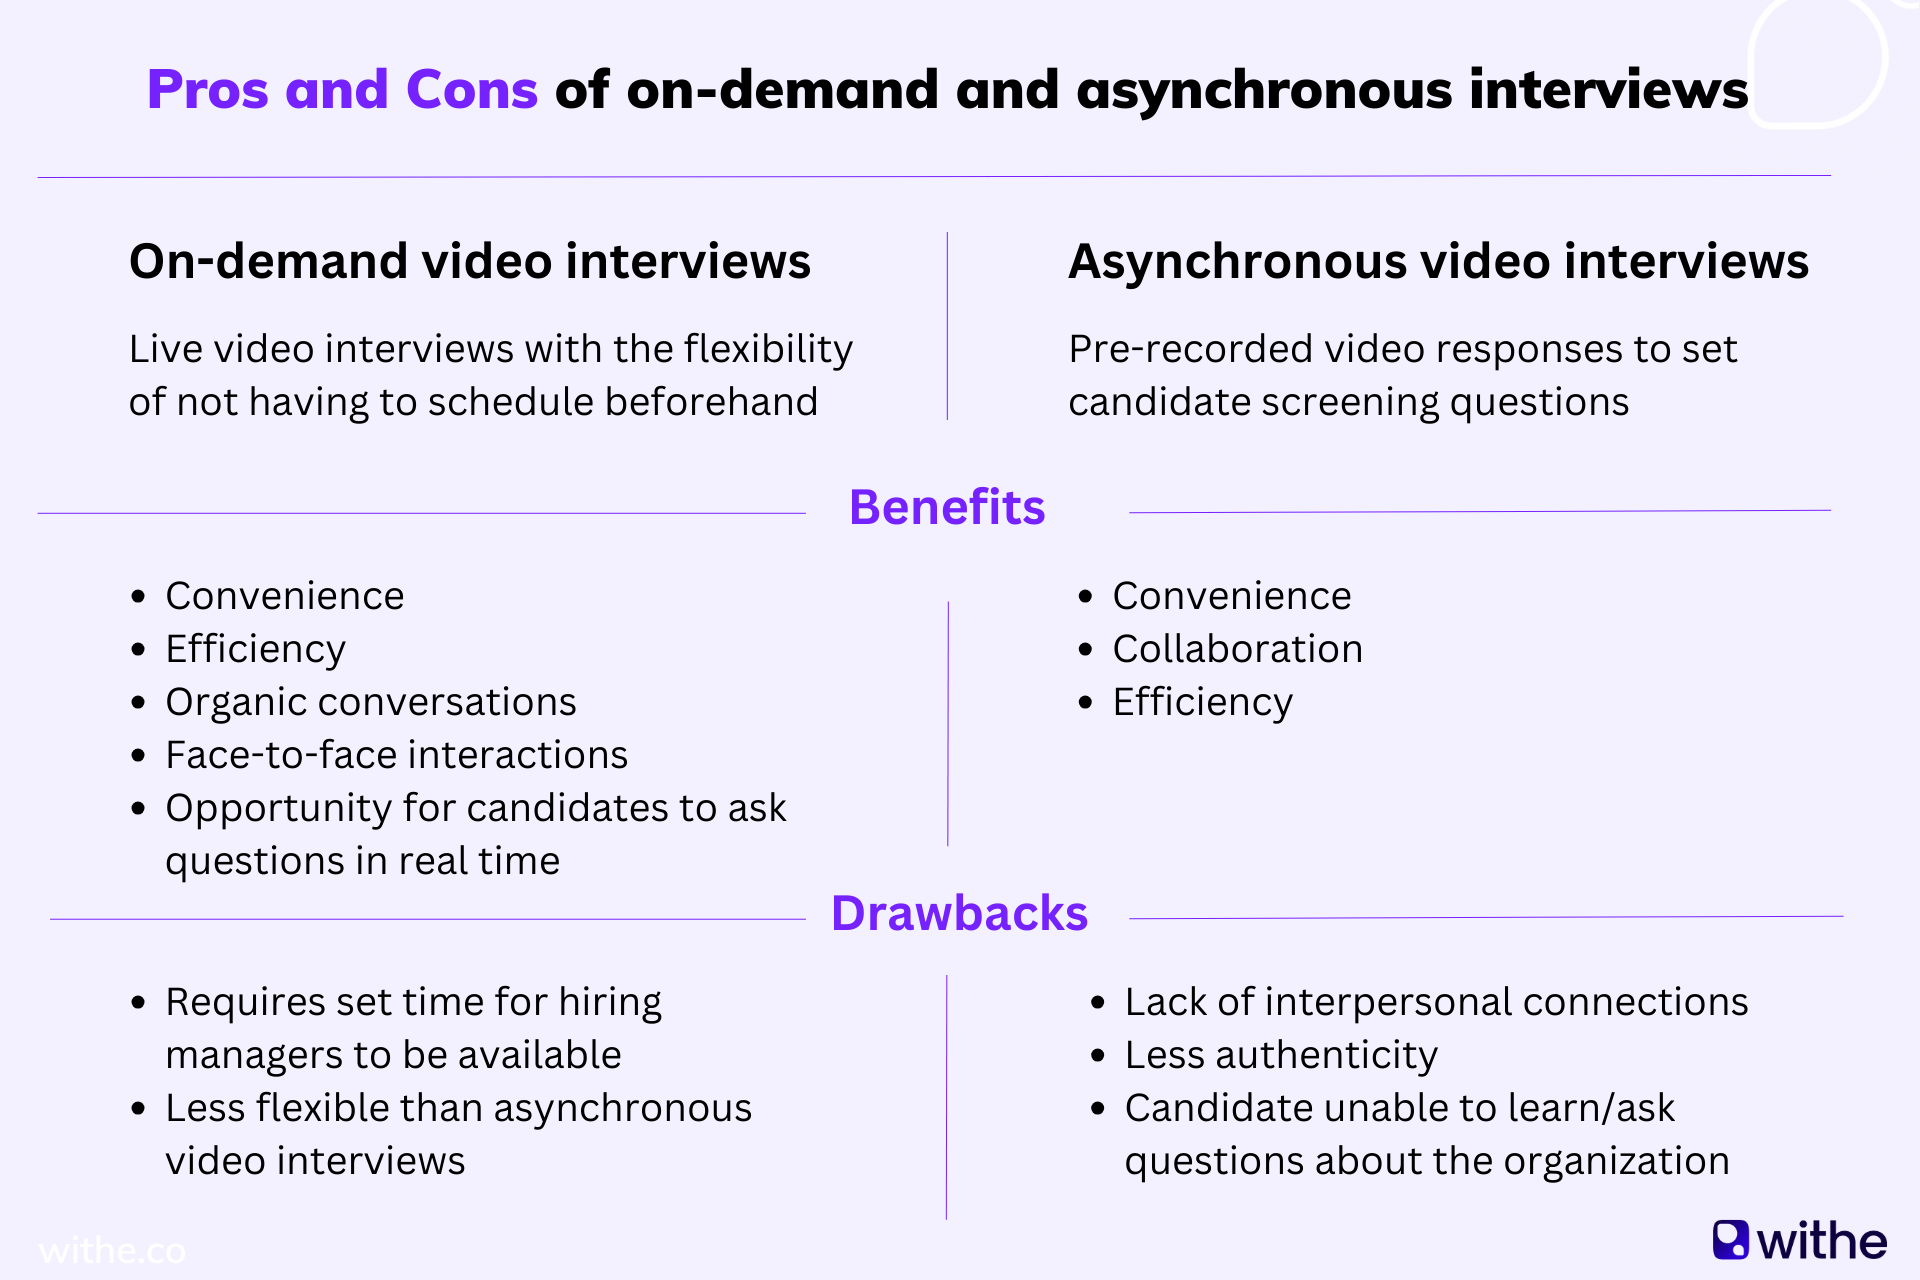 Pros and cons of on-demand and asynchronous interviews